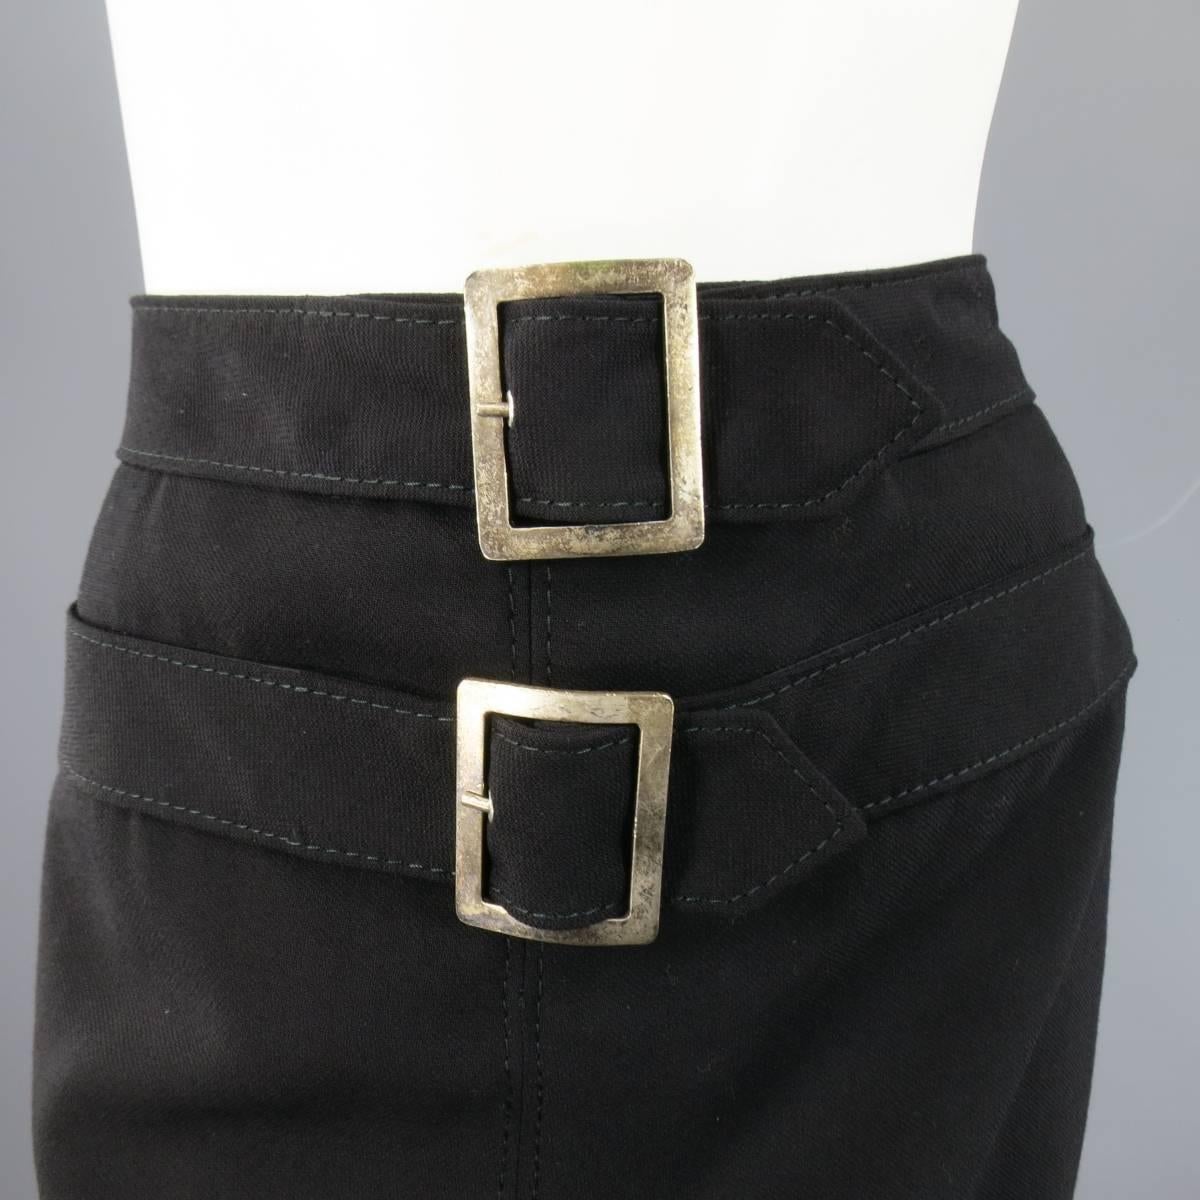 This fabulous VALENTINO pencil skirt comes in a light weight virgin wool and features a frontal zip closure, double belts with oversized antique silver buckles and satin lining. Made in Italy.
 
Good Pre-Owned Condition.
Marked: US 2
